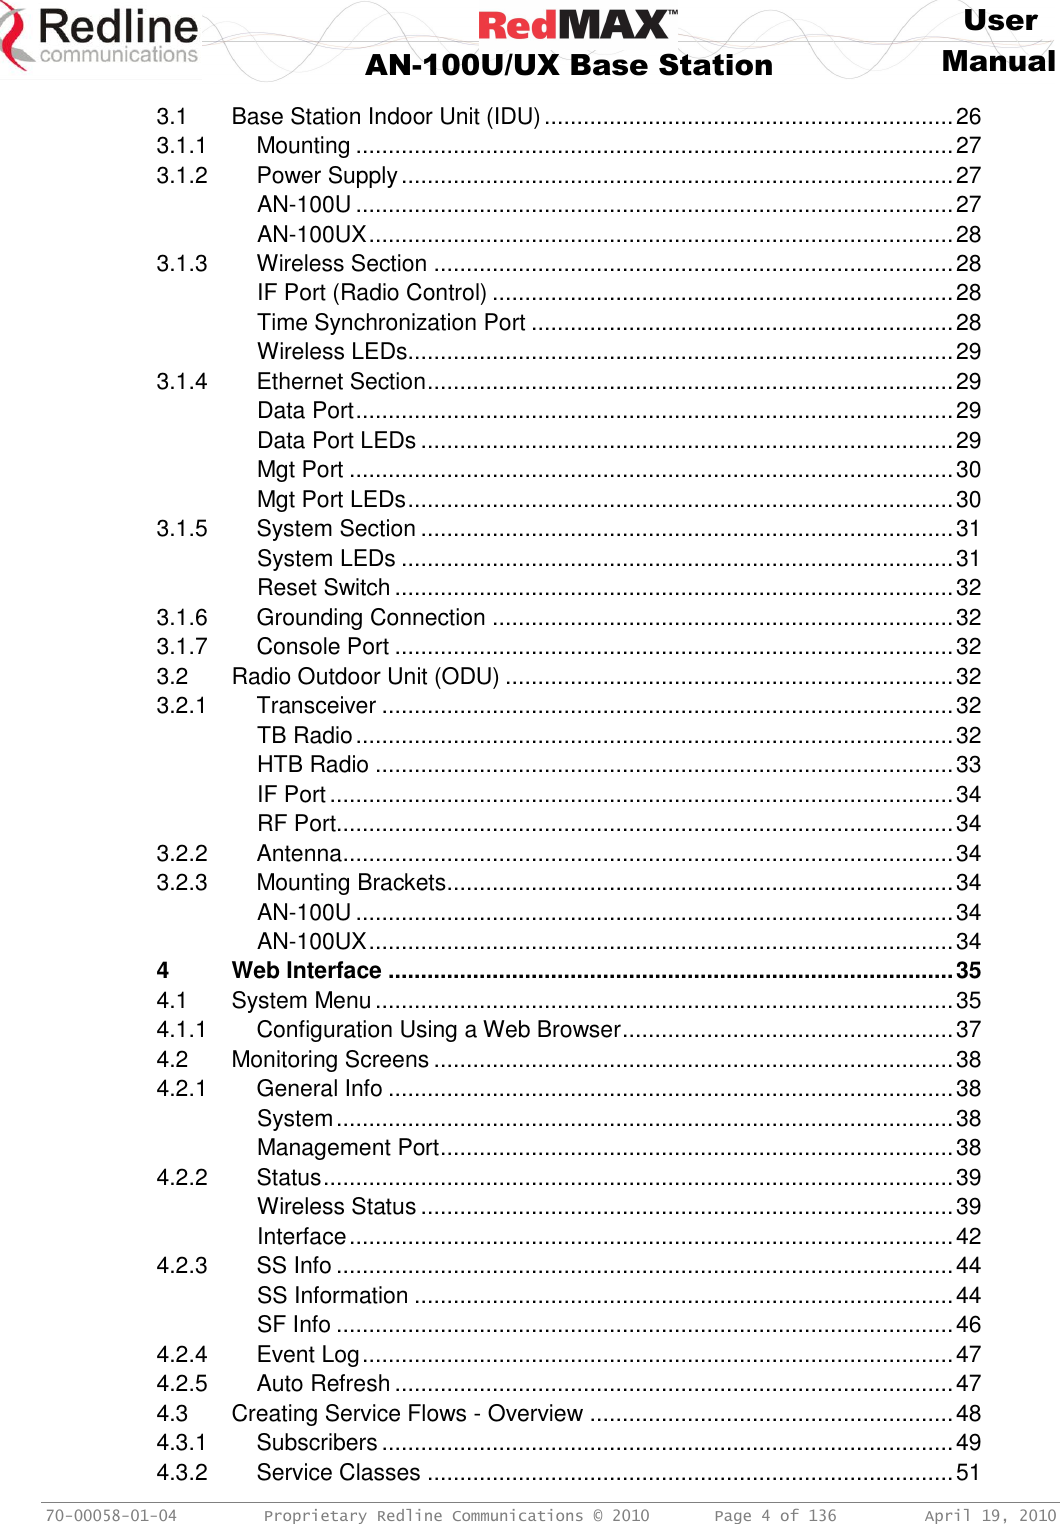     User  AN-100U/UX Base Station Manual   70-00058-01-04  Proprietary Redline Communications © 2010   Page 4 of 136  April 19, 2010 3.1 Base Station Indoor Unit (IDU) ............................................................... 26 3.1.1 Mounting ............................................................................................ 27 3.1.2 Power Supply ..................................................................................... 27 AN-100U ............................................................................................ 27 AN-100UX .......................................................................................... 28 3.1.3 Wireless Section ................................................................................ 28 IF Port (Radio Control) ....................................................................... 28 Time Synchronization Port ................................................................. 28 Wireless LEDs .................................................................................... 29 3.1.4 Ethernet Section ................................................................................. 29 Data Port ............................................................................................ 29 Data Port LEDs .................................................................................. 29 Mgt Port ............................................................................................. 30 Mgt Port LEDs .................................................................................... 30 3.1.5 System Section .................................................................................. 31 System LEDs ..................................................................................... 31 Reset Switch ...................................................................................... 32 3.1.6 Grounding Connection ....................................................................... 32 3.1.7 Console Port ...................................................................................... 32 3.2 Radio Outdoor Unit (ODU) ..................................................................... 32 3.2.1 Transceiver ........................................................................................ 32 TB Radio ............................................................................................ 32 HTB Radio ......................................................................................... 33 IF Port ................................................................................................ 34 RF Port............................................................................................... 34 3.2.2 Antenna .............................................................................................. 34 3.2.3 Mounting Brackets .............................................................................. 34 AN-100U ............................................................................................ 34 AN-100UX .......................................................................................... 34 4 Web Interface ....................................................................................... 35 4.1 System Menu ......................................................................................... 35 4.1.1 Configuration Using a Web Browser ................................................... 37 4.2 Monitoring Screens ................................................................................ 38 4.2.1 General Info ....................................................................................... 38 System ............................................................................................... 38 Management Port ............................................................................... 38 4.2.2 Status ................................................................................................. 39 Wireless Status .................................................................................. 39 Interface ............................................................................................. 42 4.2.3 SS Info ............................................................................................... 44 SS Information ................................................................................... 44 SF Info ............................................................................................... 46 4.2.4 Event Log ........................................................................................... 47 4.2.5 Auto Refresh ...................................................................................... 47 4.3 Creating Service Flows - Overview ........................................................ 48 4.3.1 Subscribers ........................................................................................ 49 4.3.2 Service Classes ................................................................................. 51 